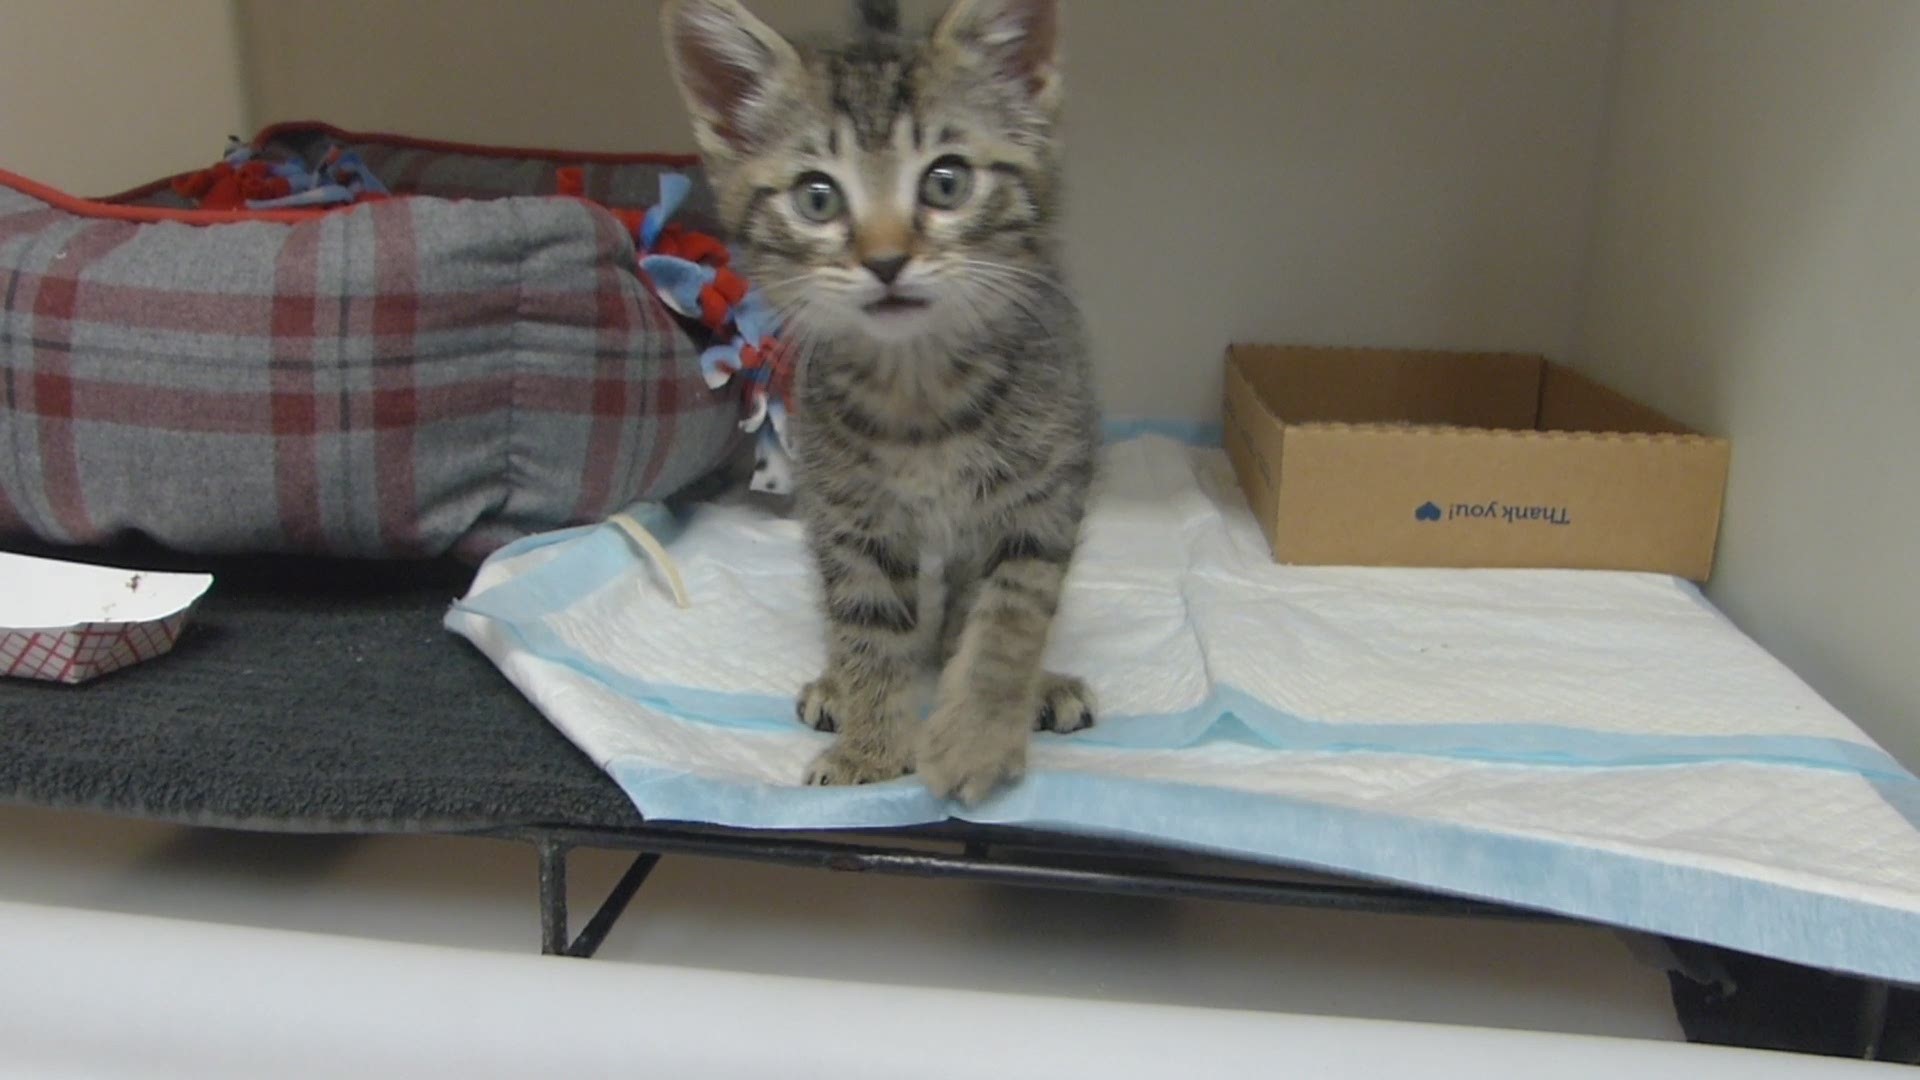 Adopters can bring home a second kitten for $5. The promotion, sponsored by Petco Love, lasts through June 30.